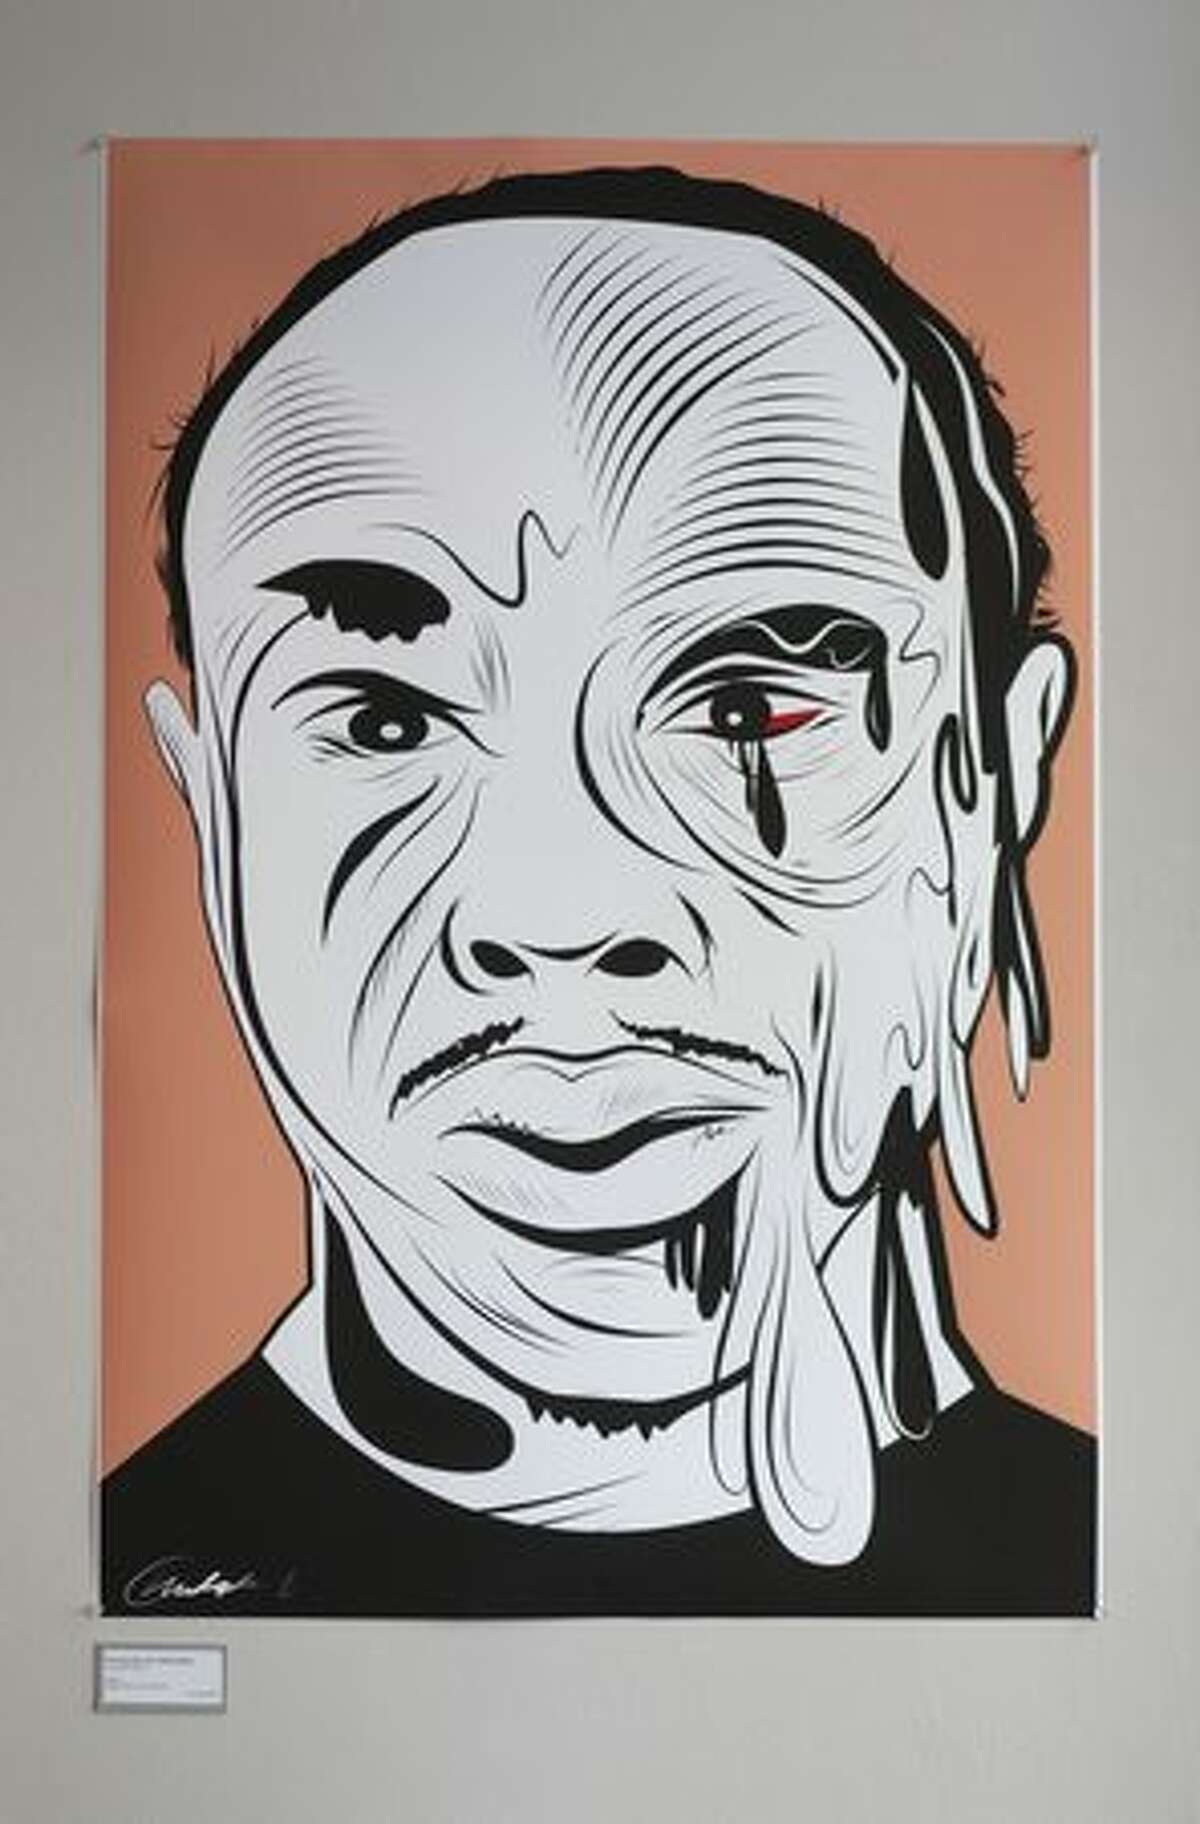 "One Eye Can Tell a Whole Story" by Christophe Roberts, a digital print, is shown at pun(c)tuation art gallery on East Pike Street in Seattle on Tuesday May 11, 2010. Art at the show deals with the issue of Alley-Barnes and his beating by Seattle Police officers in 2005.